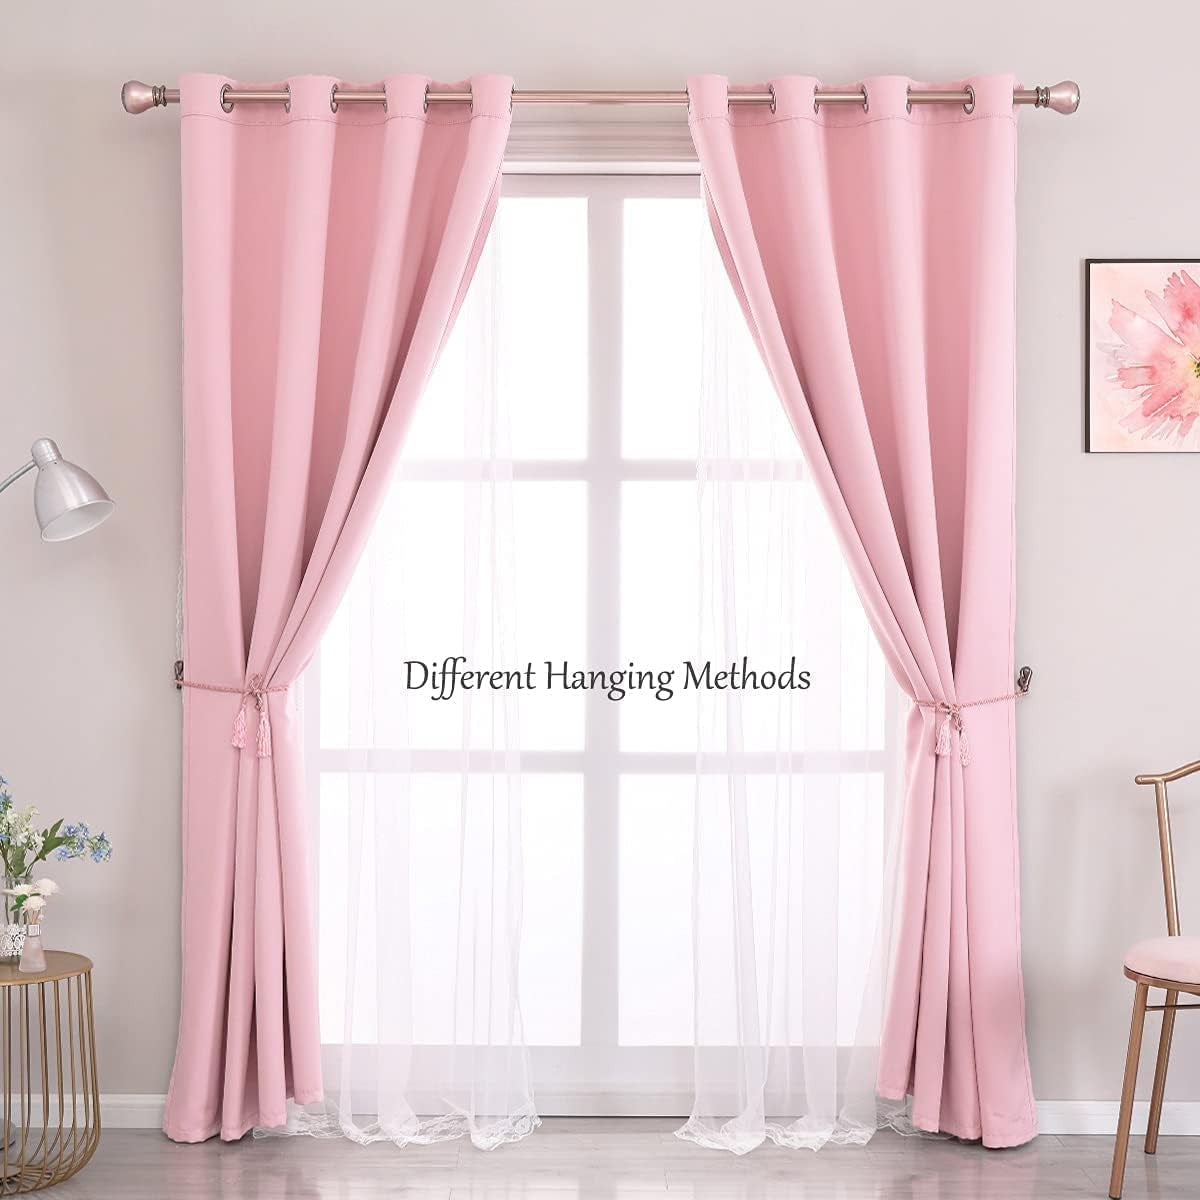 Pink Blackout Curtains 84 Inch Length - Double Layers Princess Girls Curtains & Draperies Panels for Kids Bedroom Living Room Nursery Pink Lace Hem Room Darkening Curtains, 2 Pcs  SOFJAGETQ   